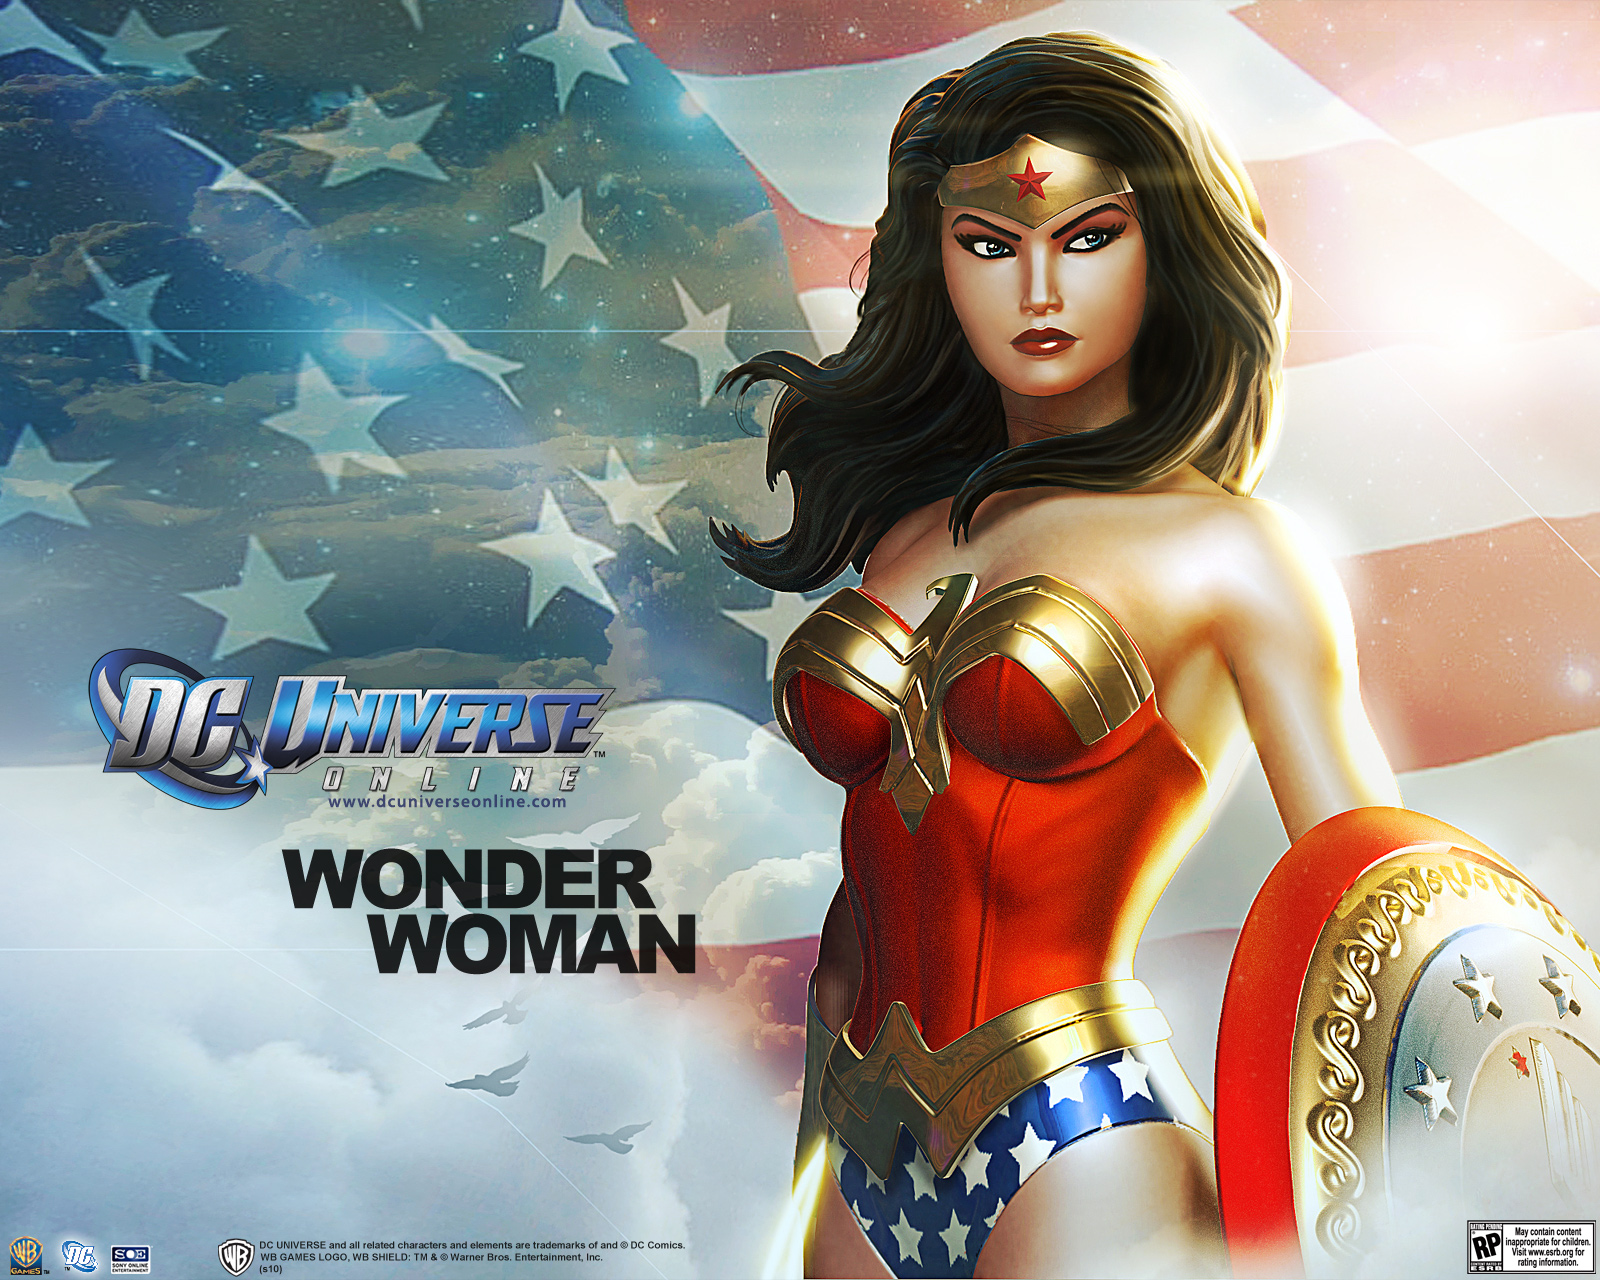 To The Wonder Woman Image Colection Just Right Click On